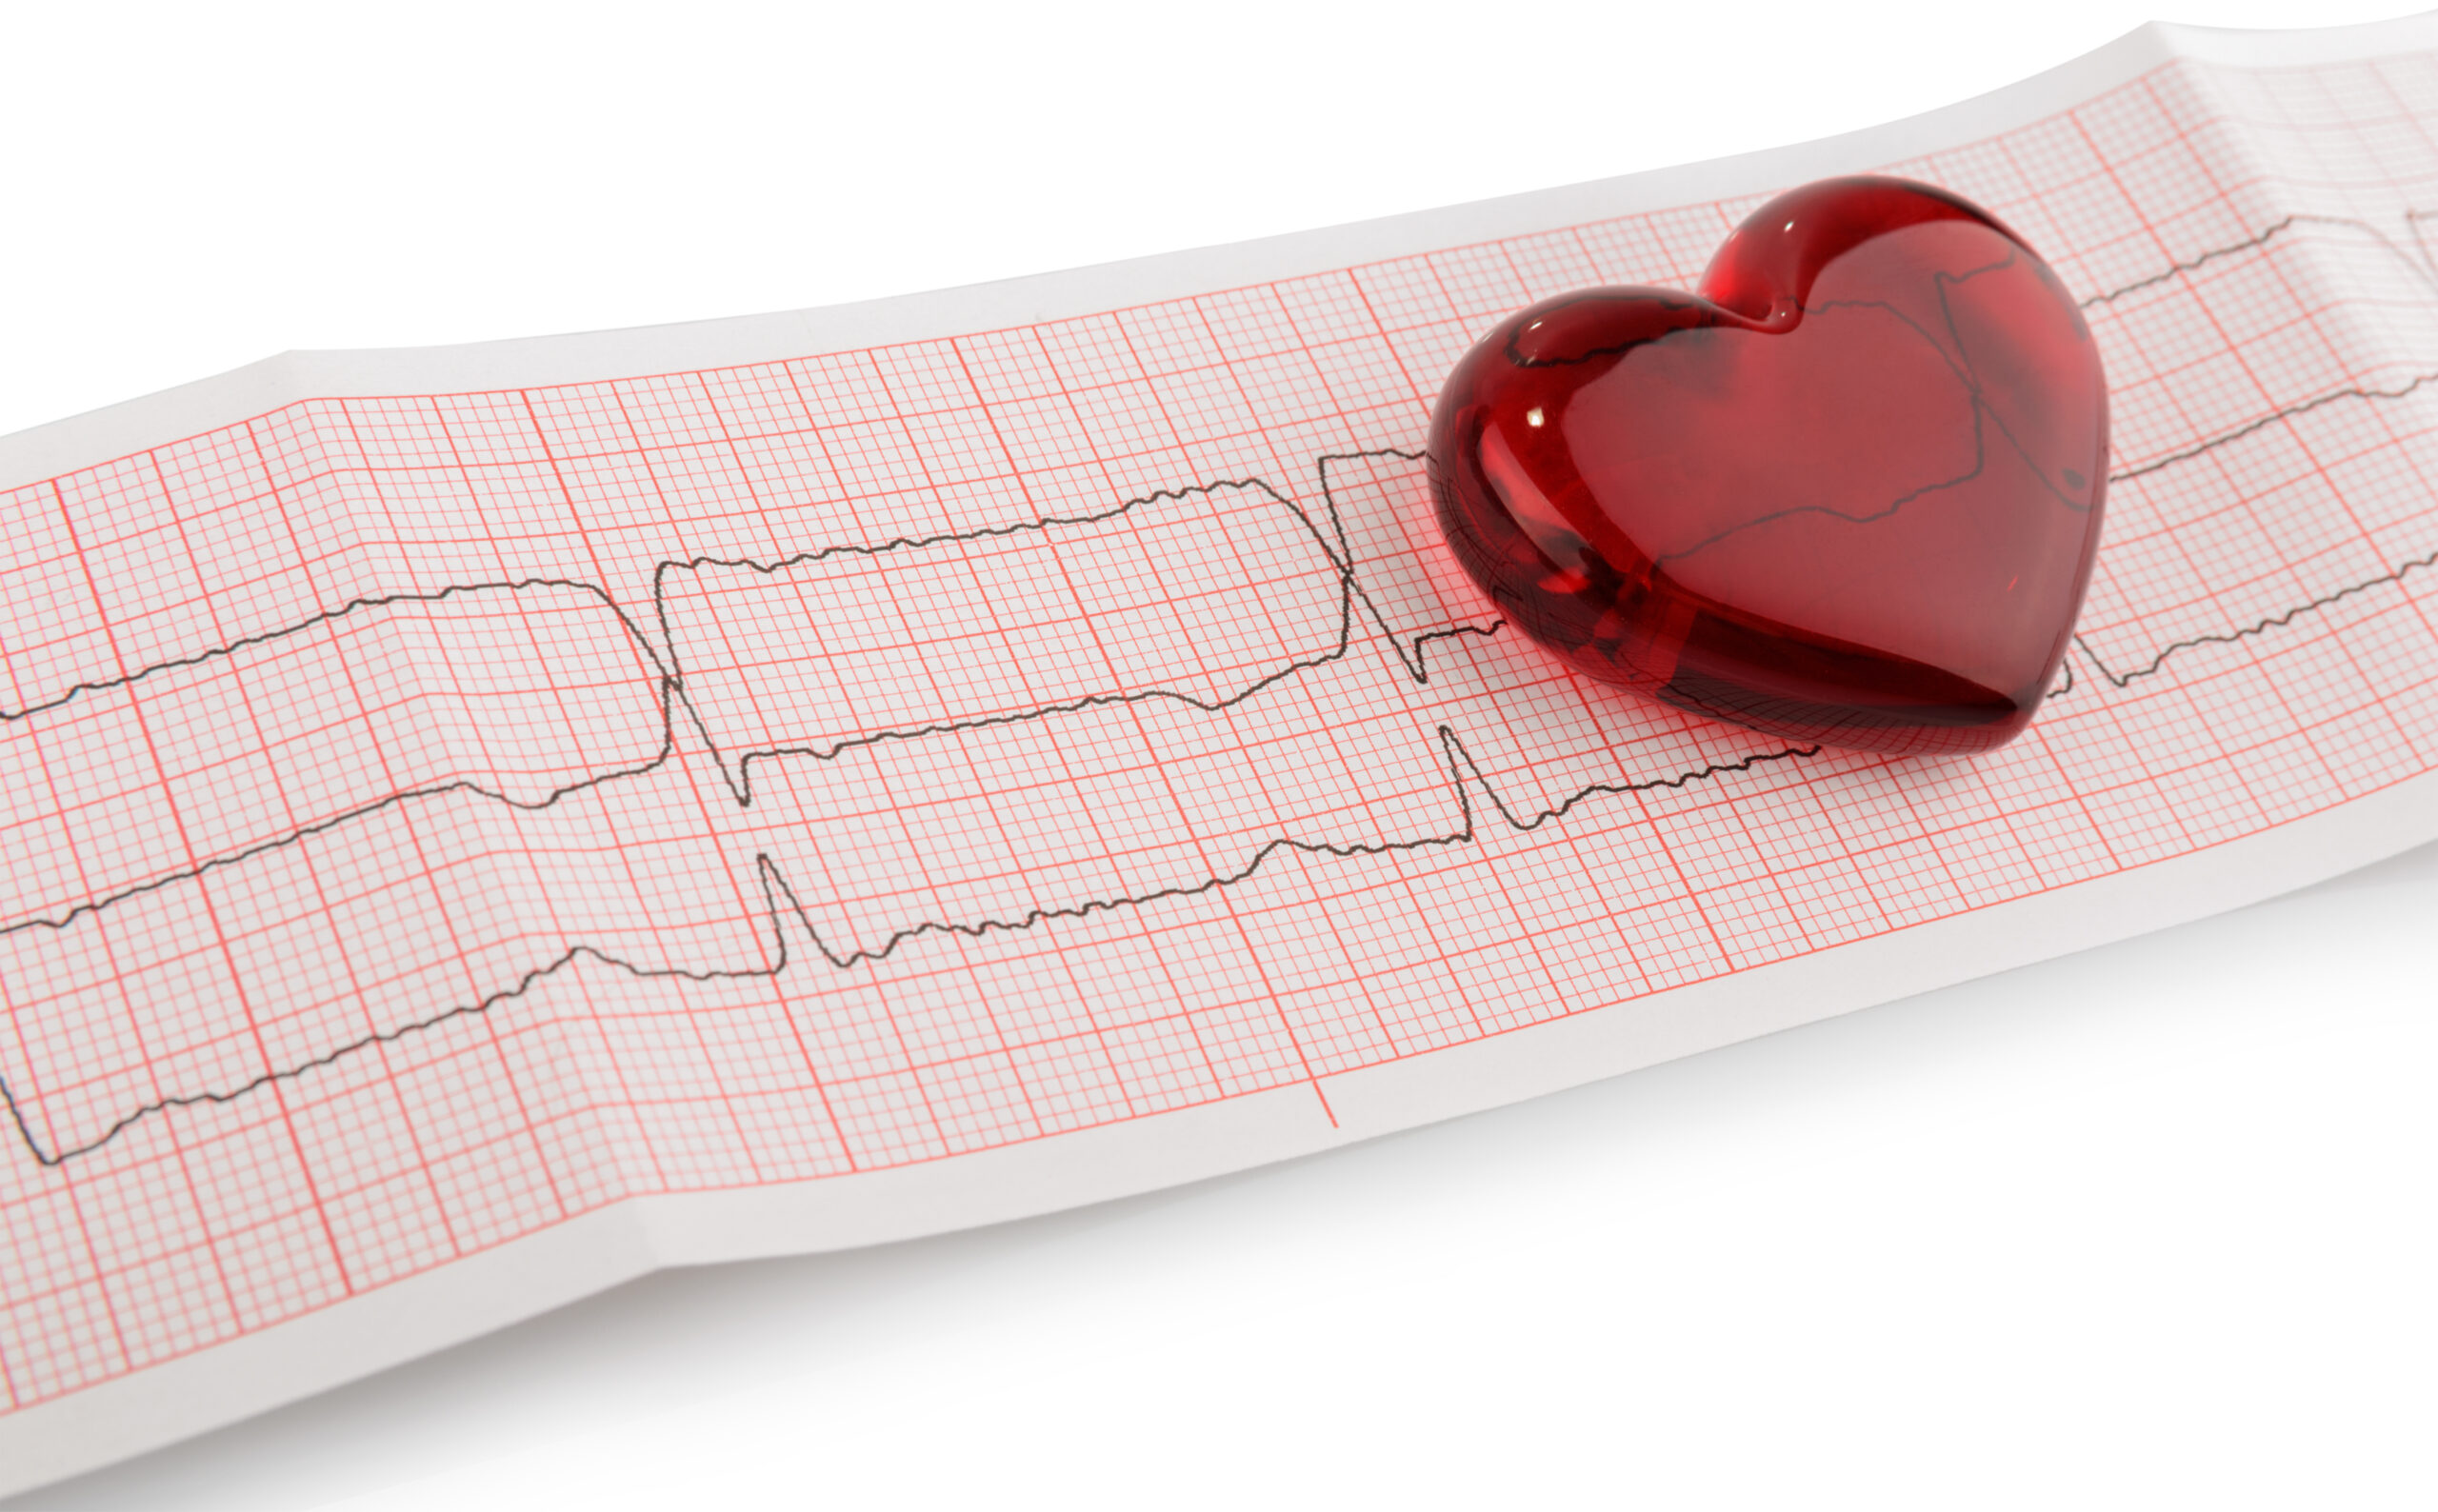 Heart Attacks Are Increasing Among Those Under 40